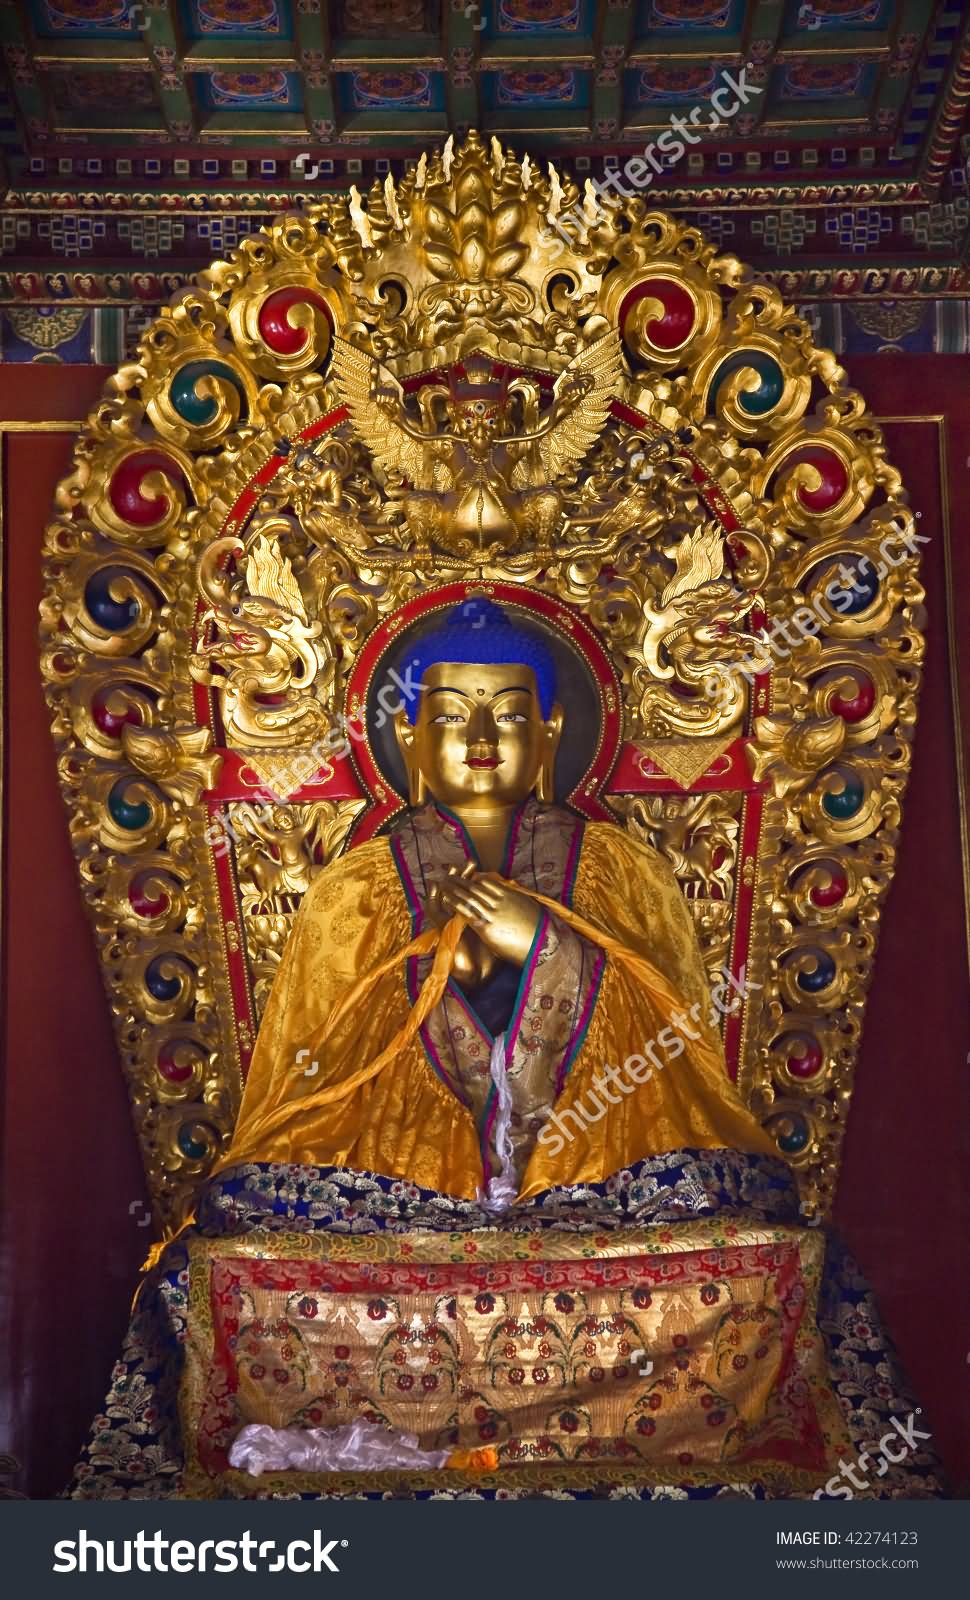 Golden Statue Of Lord Buddha Inside The Yonghe Temple